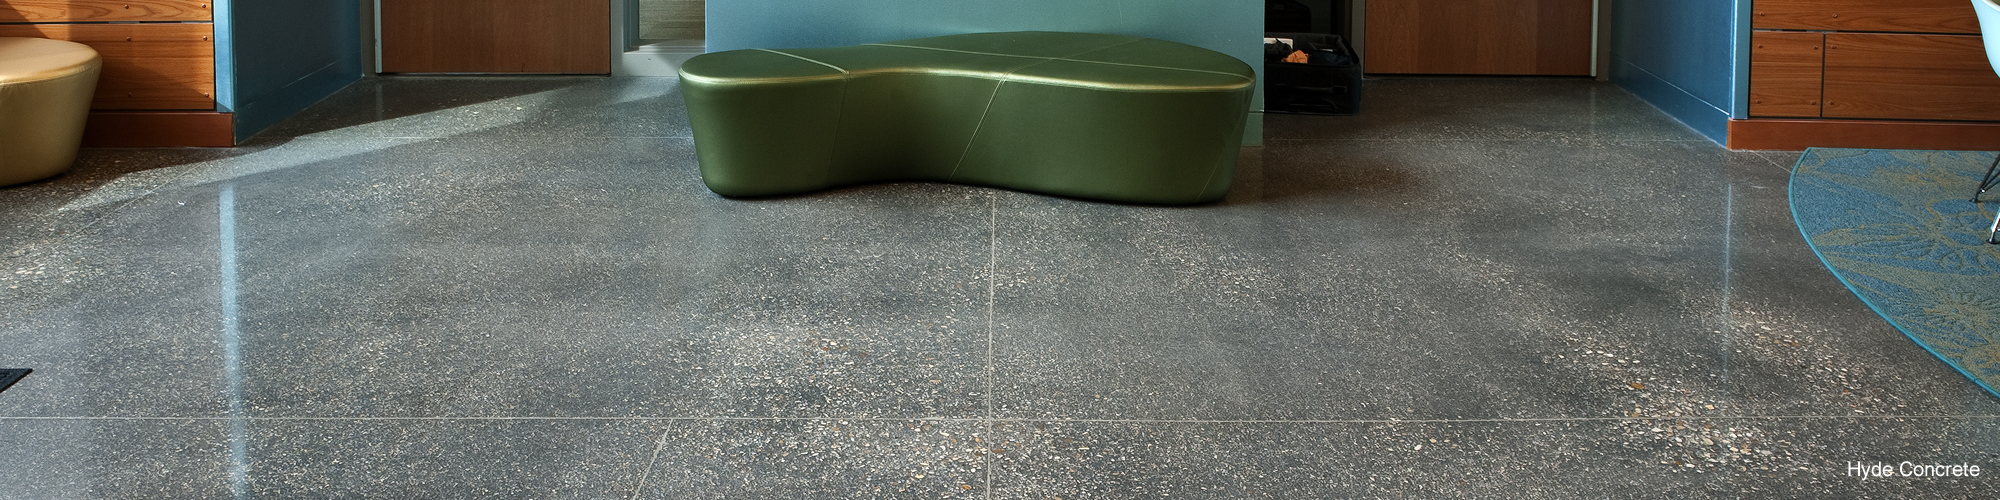 Is Stained Concrete Slippery?